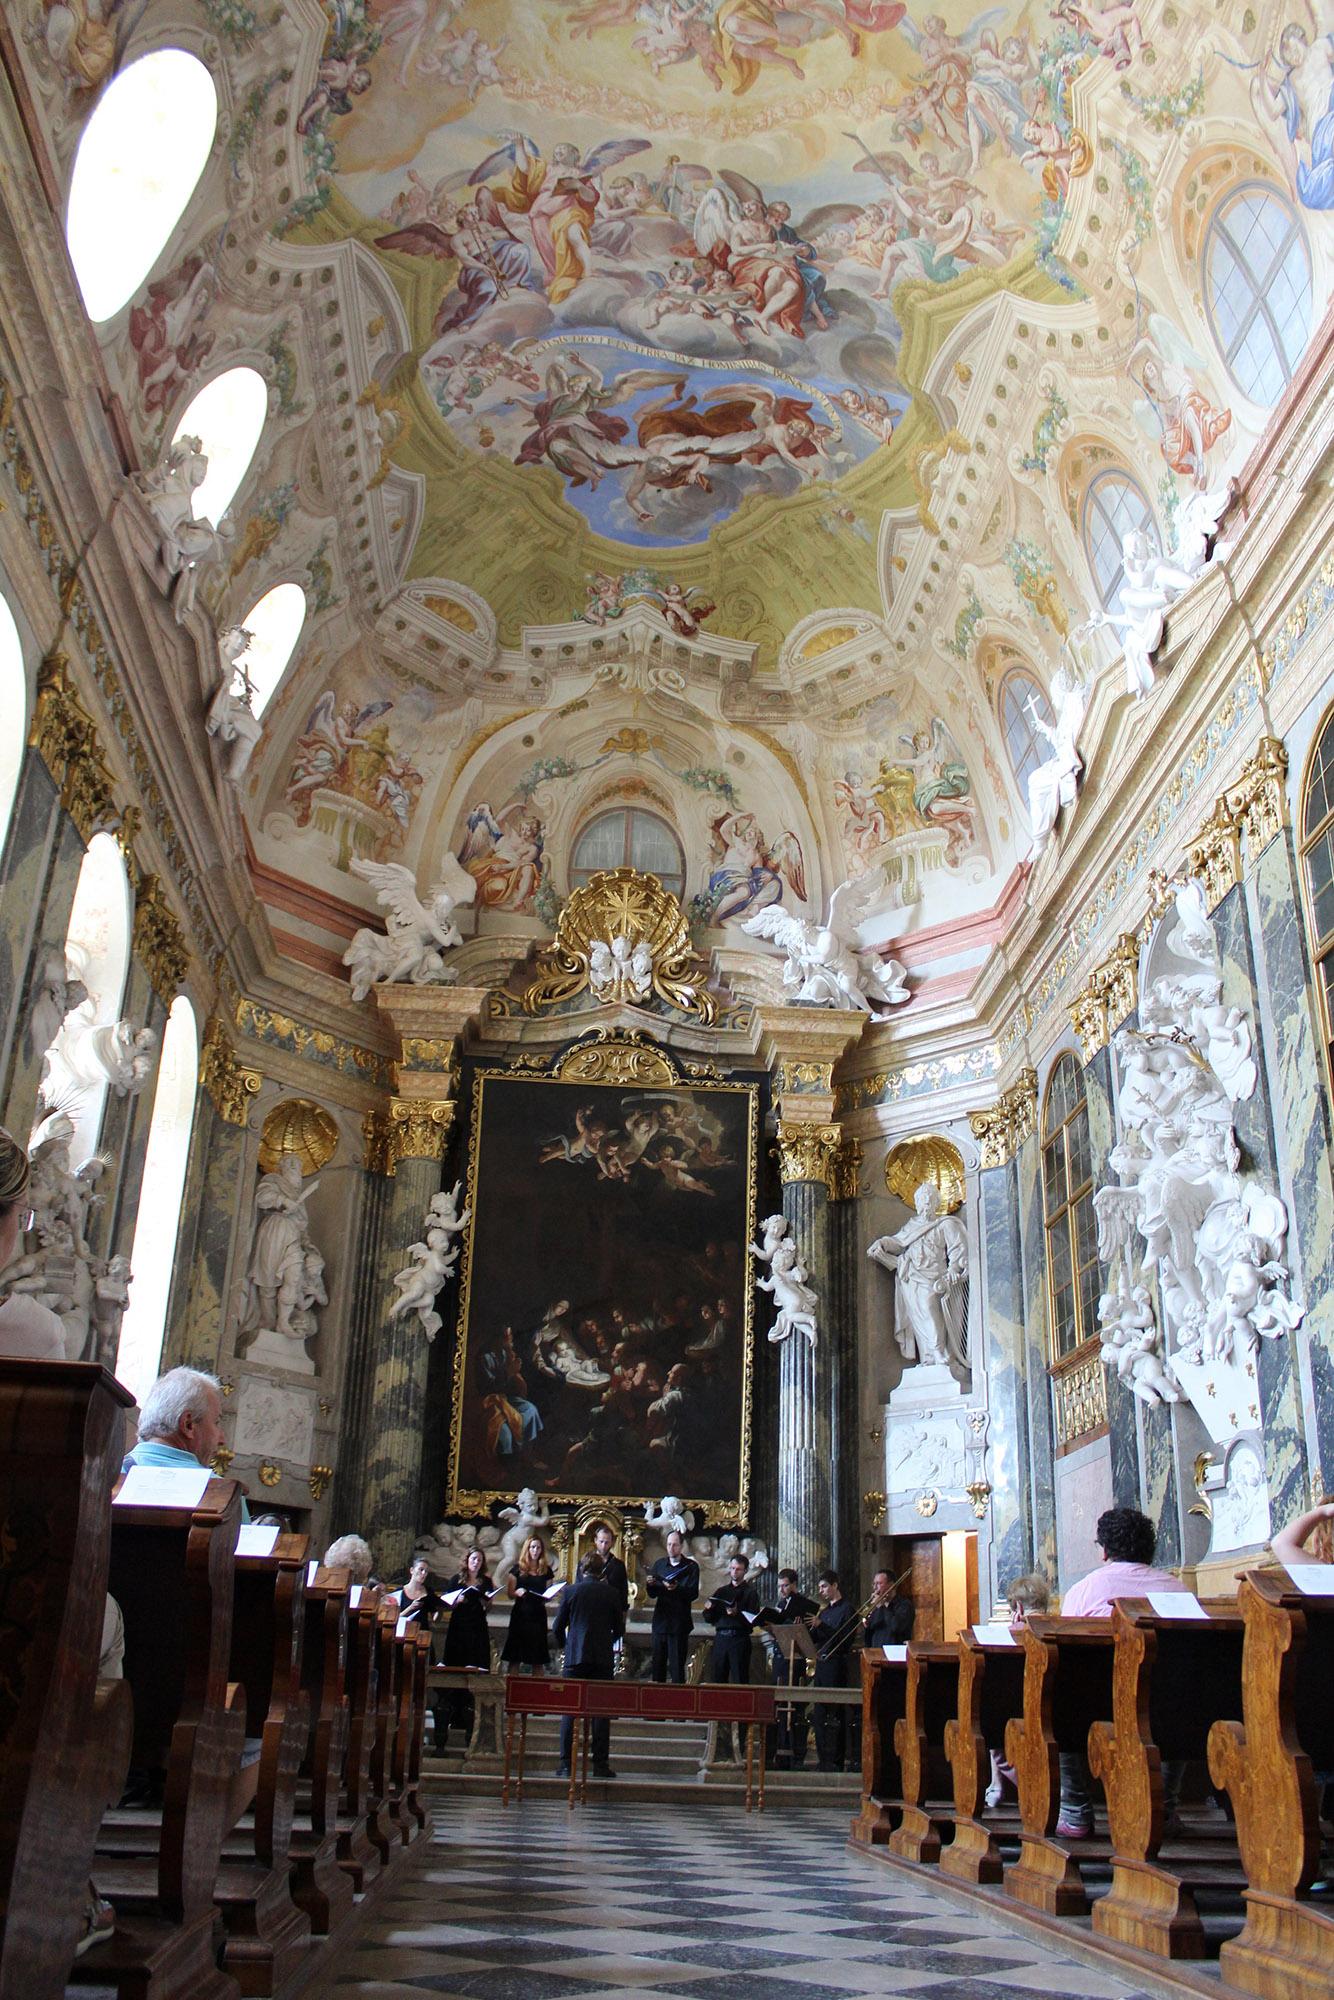 The beautifully decorated Castle Chapel from 1729, with an organ constructed by Lothar Franz Walther, is a purely Central European baroque masterpiece. – © Lenka Beránková